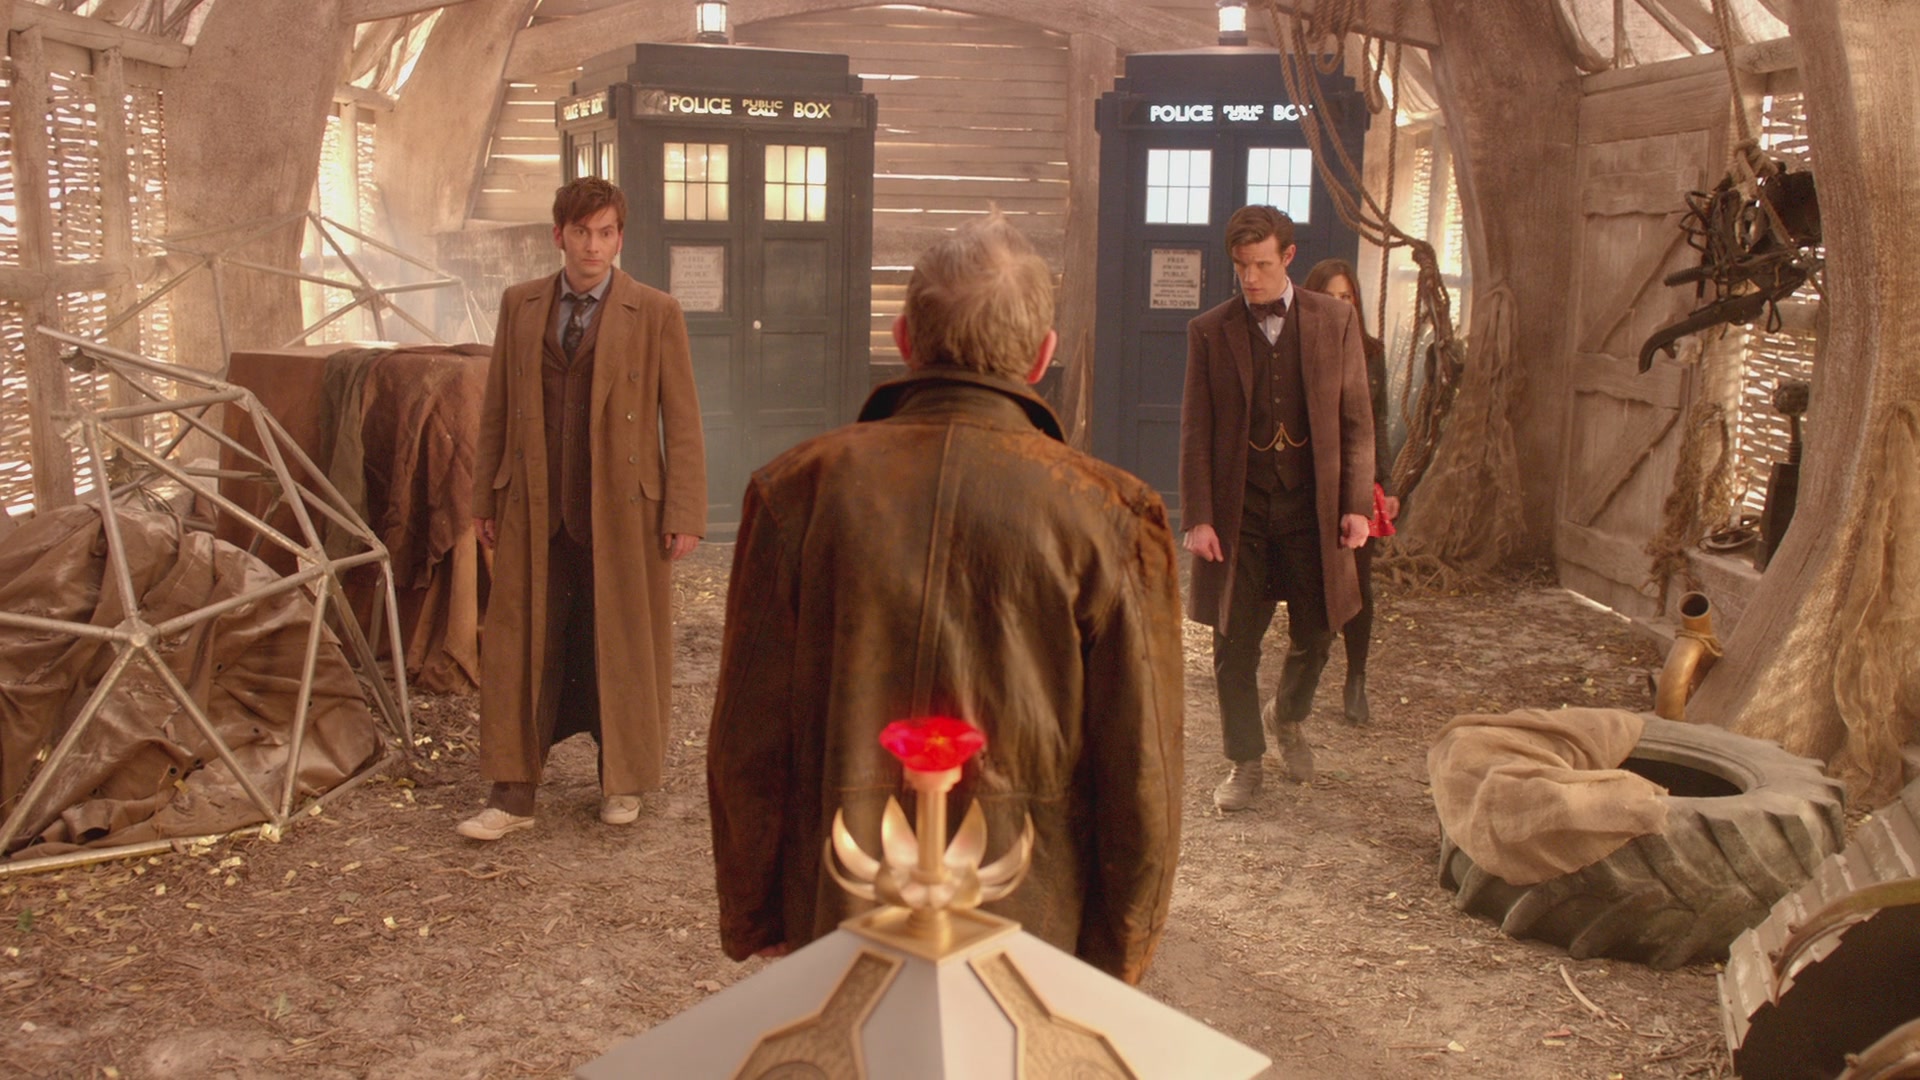 DayOfTheDoctor-Caps-1072.jpg